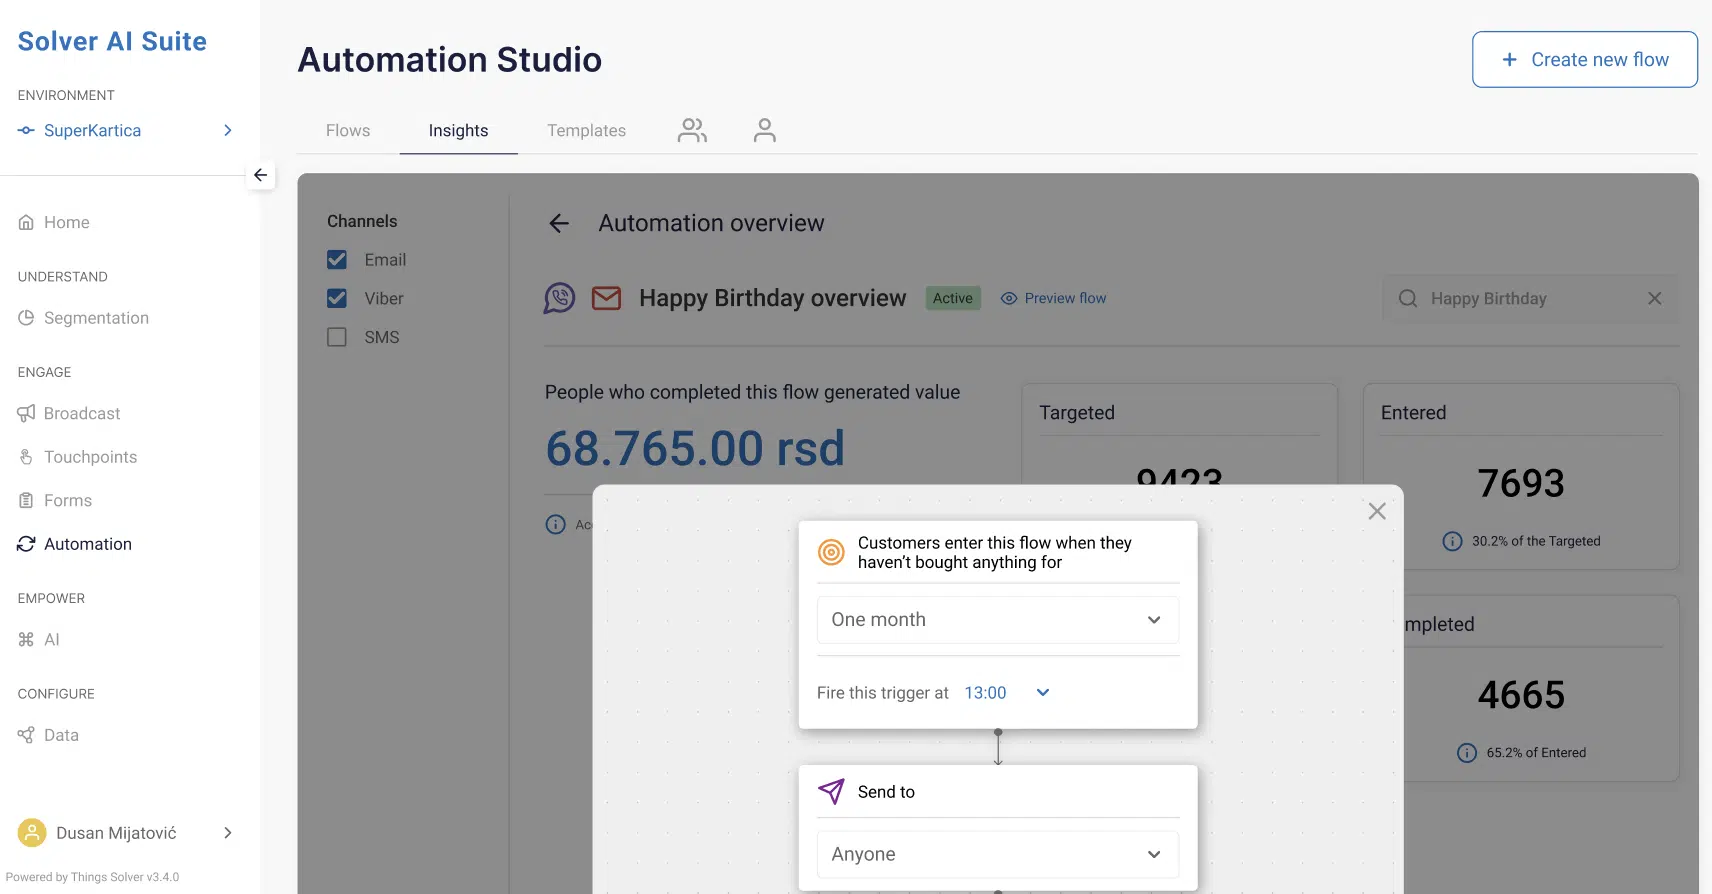 Solver Automation Studio: Automation Insights